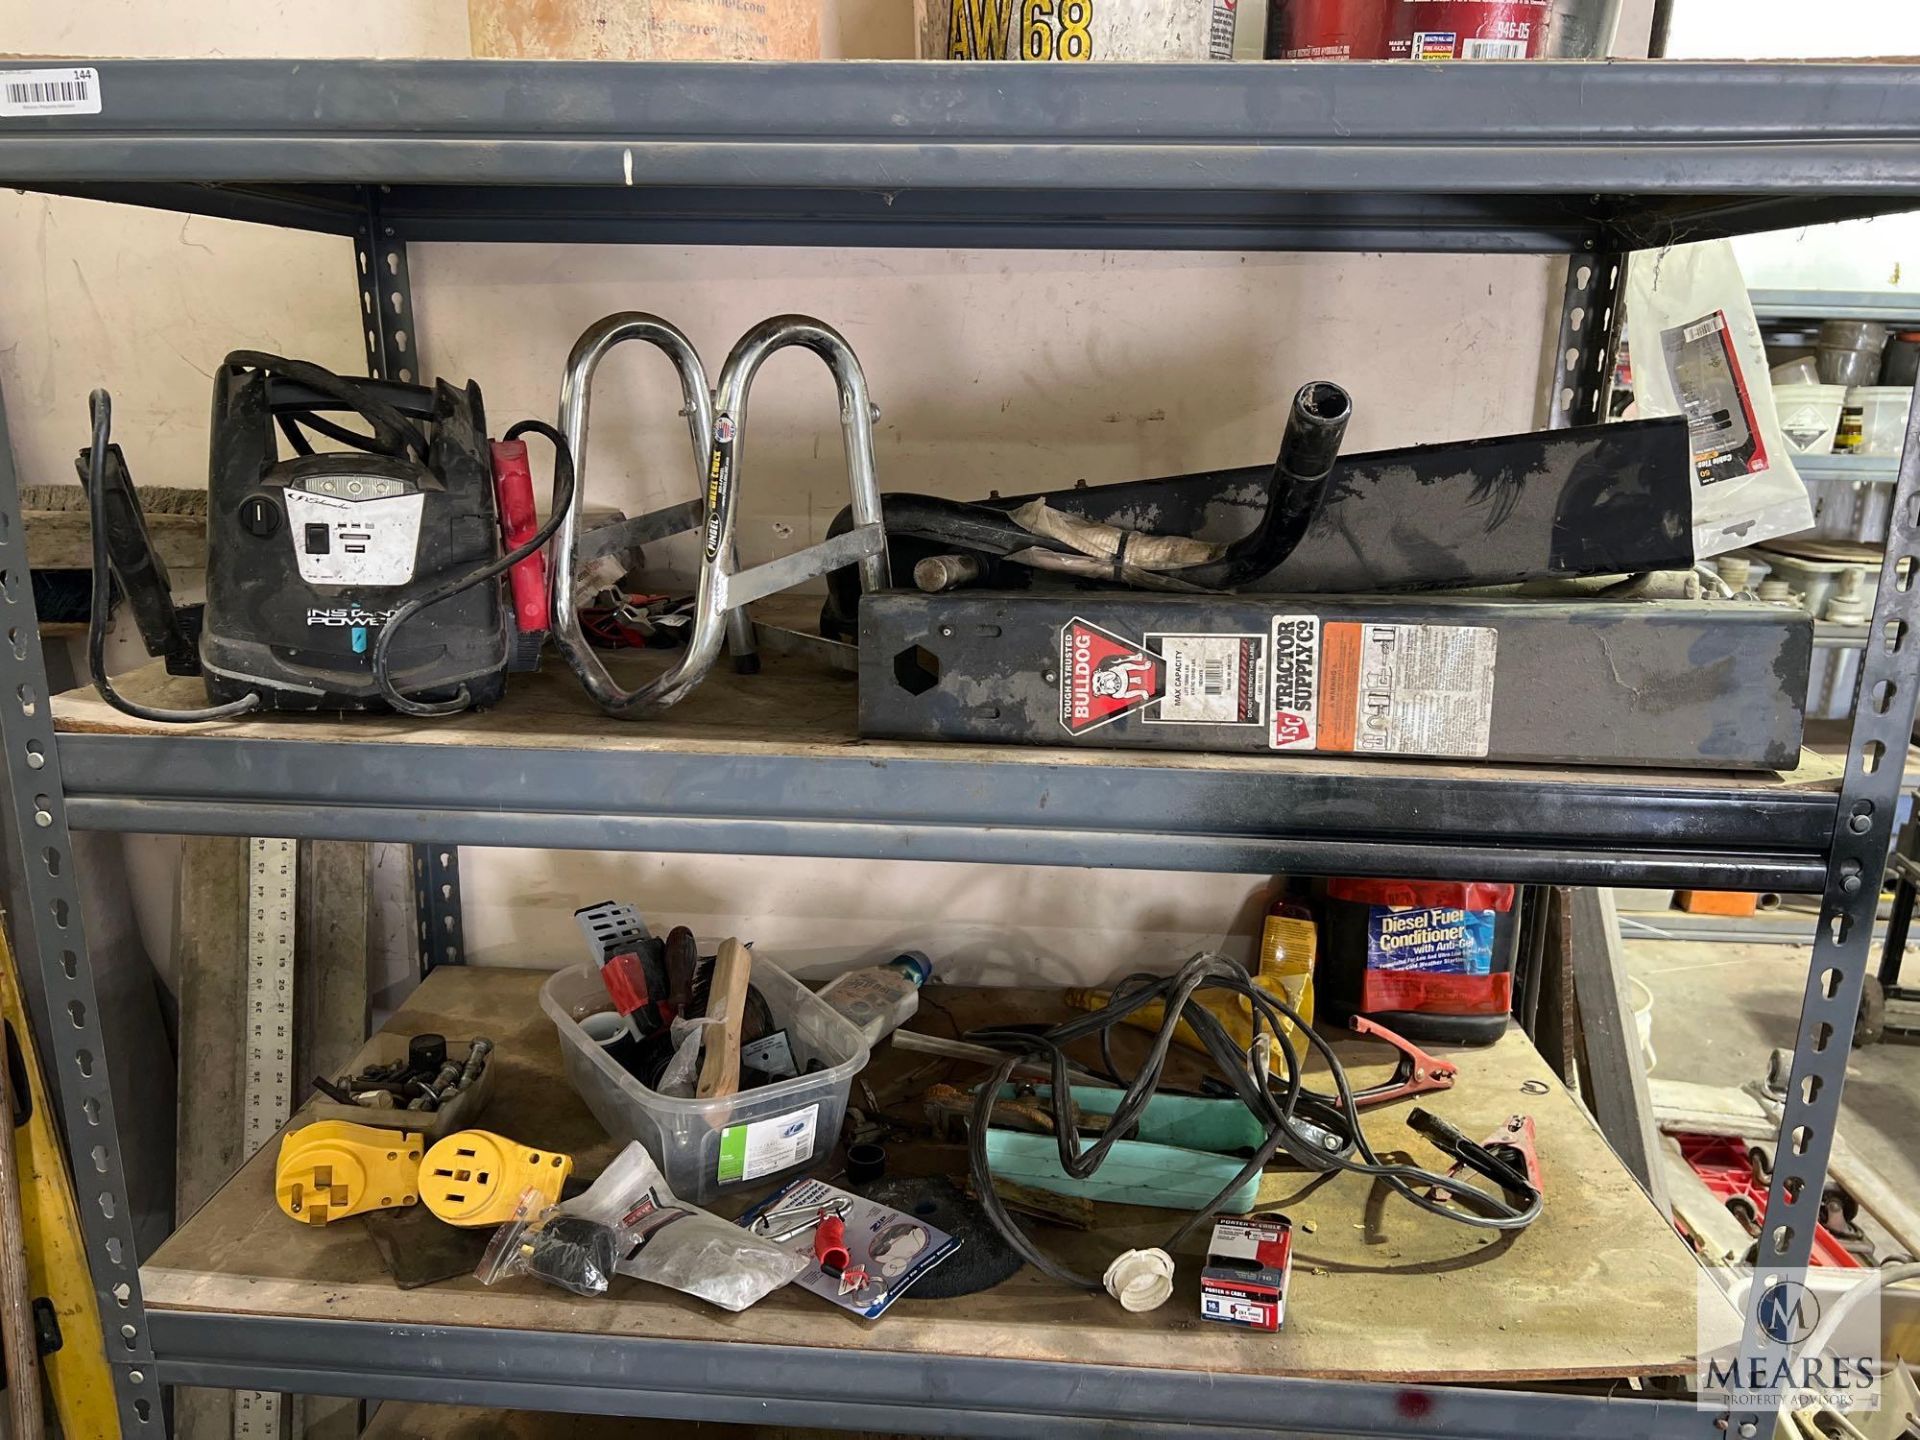 Shelf and Contents - Battery Chargers, Electrical Items, Hardware - Image 2 of 2